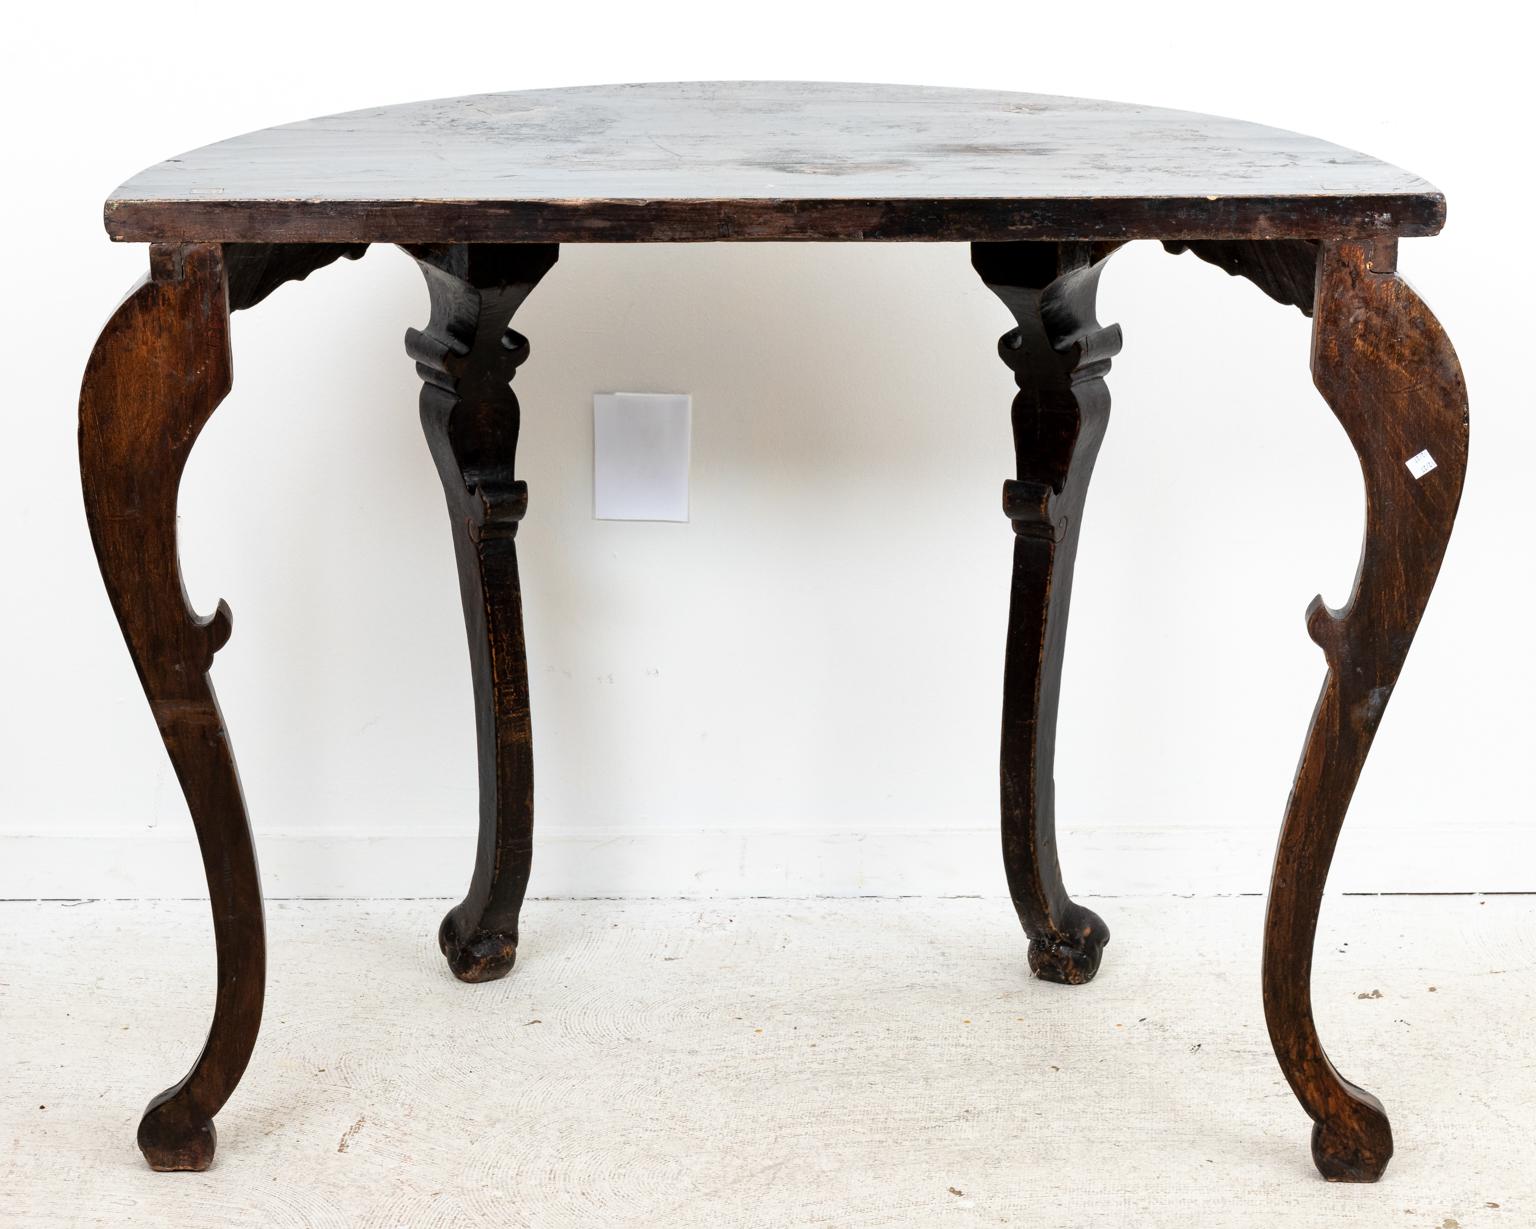 Circa 1900 Black lacquer Chinese demilune console table with curved skirt and cabriolet legs. Please note of wear consistent with age. Made in China.